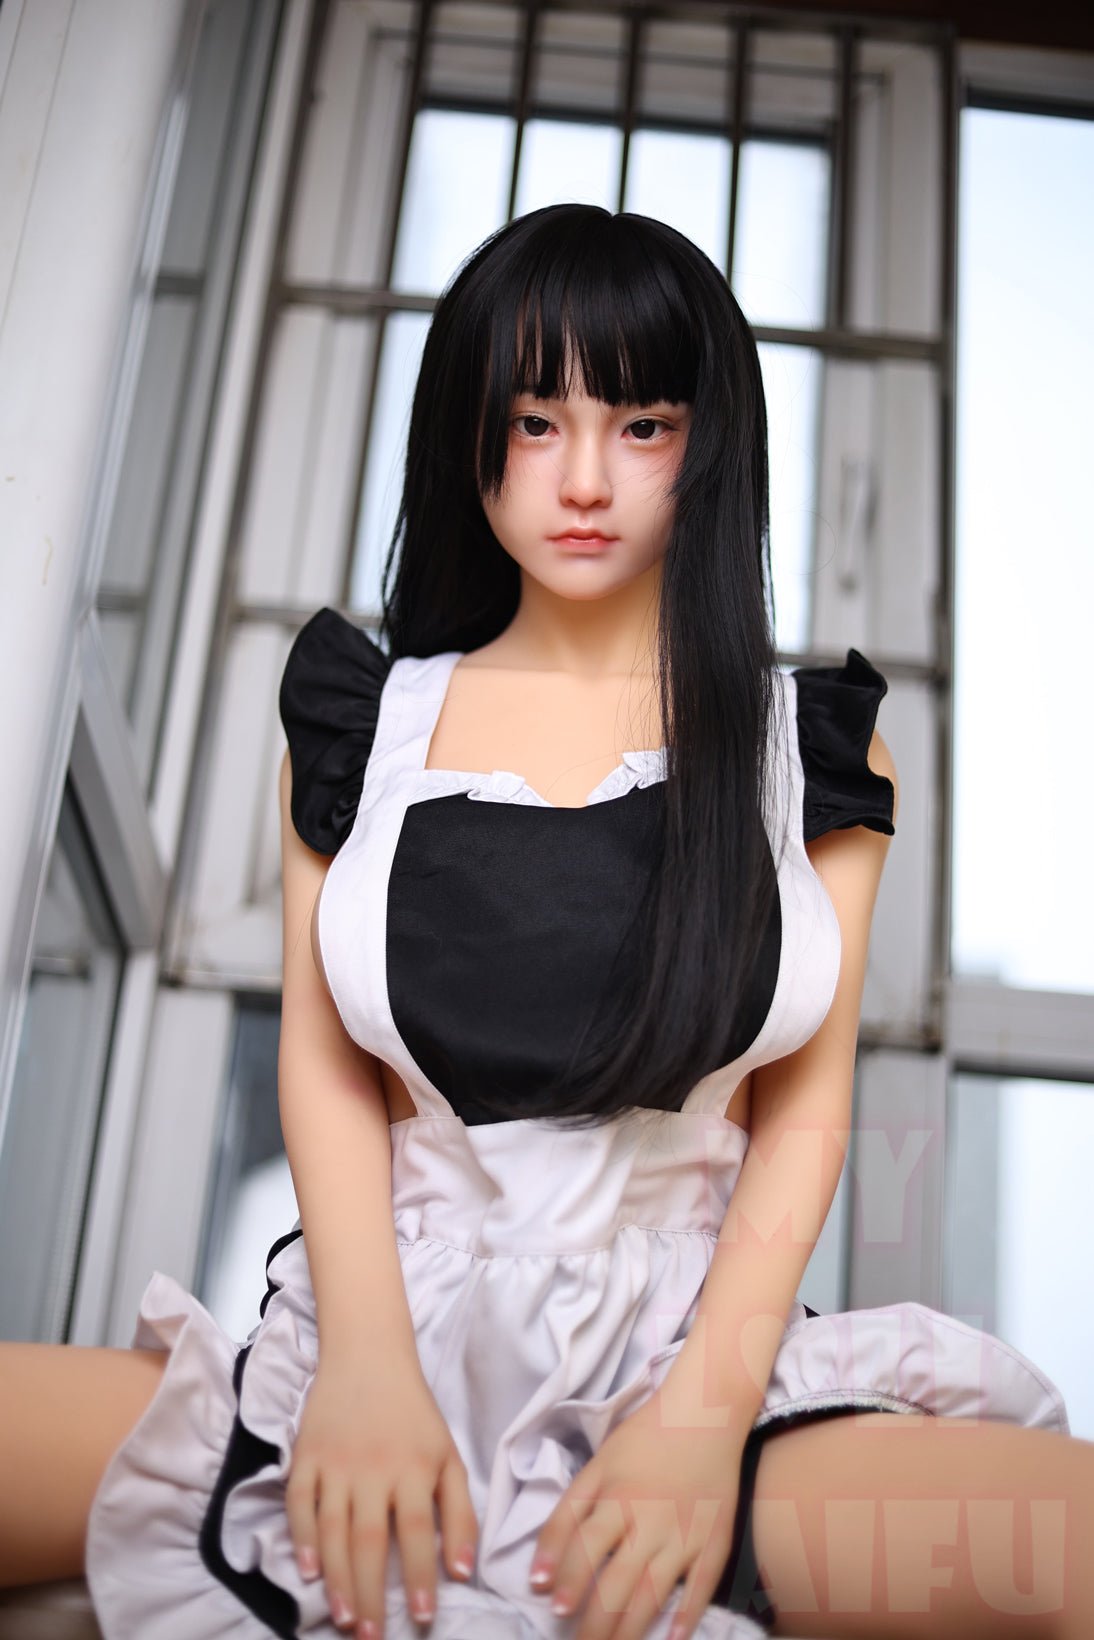 MyLoliWife 150cm D Cup Big Breast SiliconeandTpe Sex Doll-Rio pic